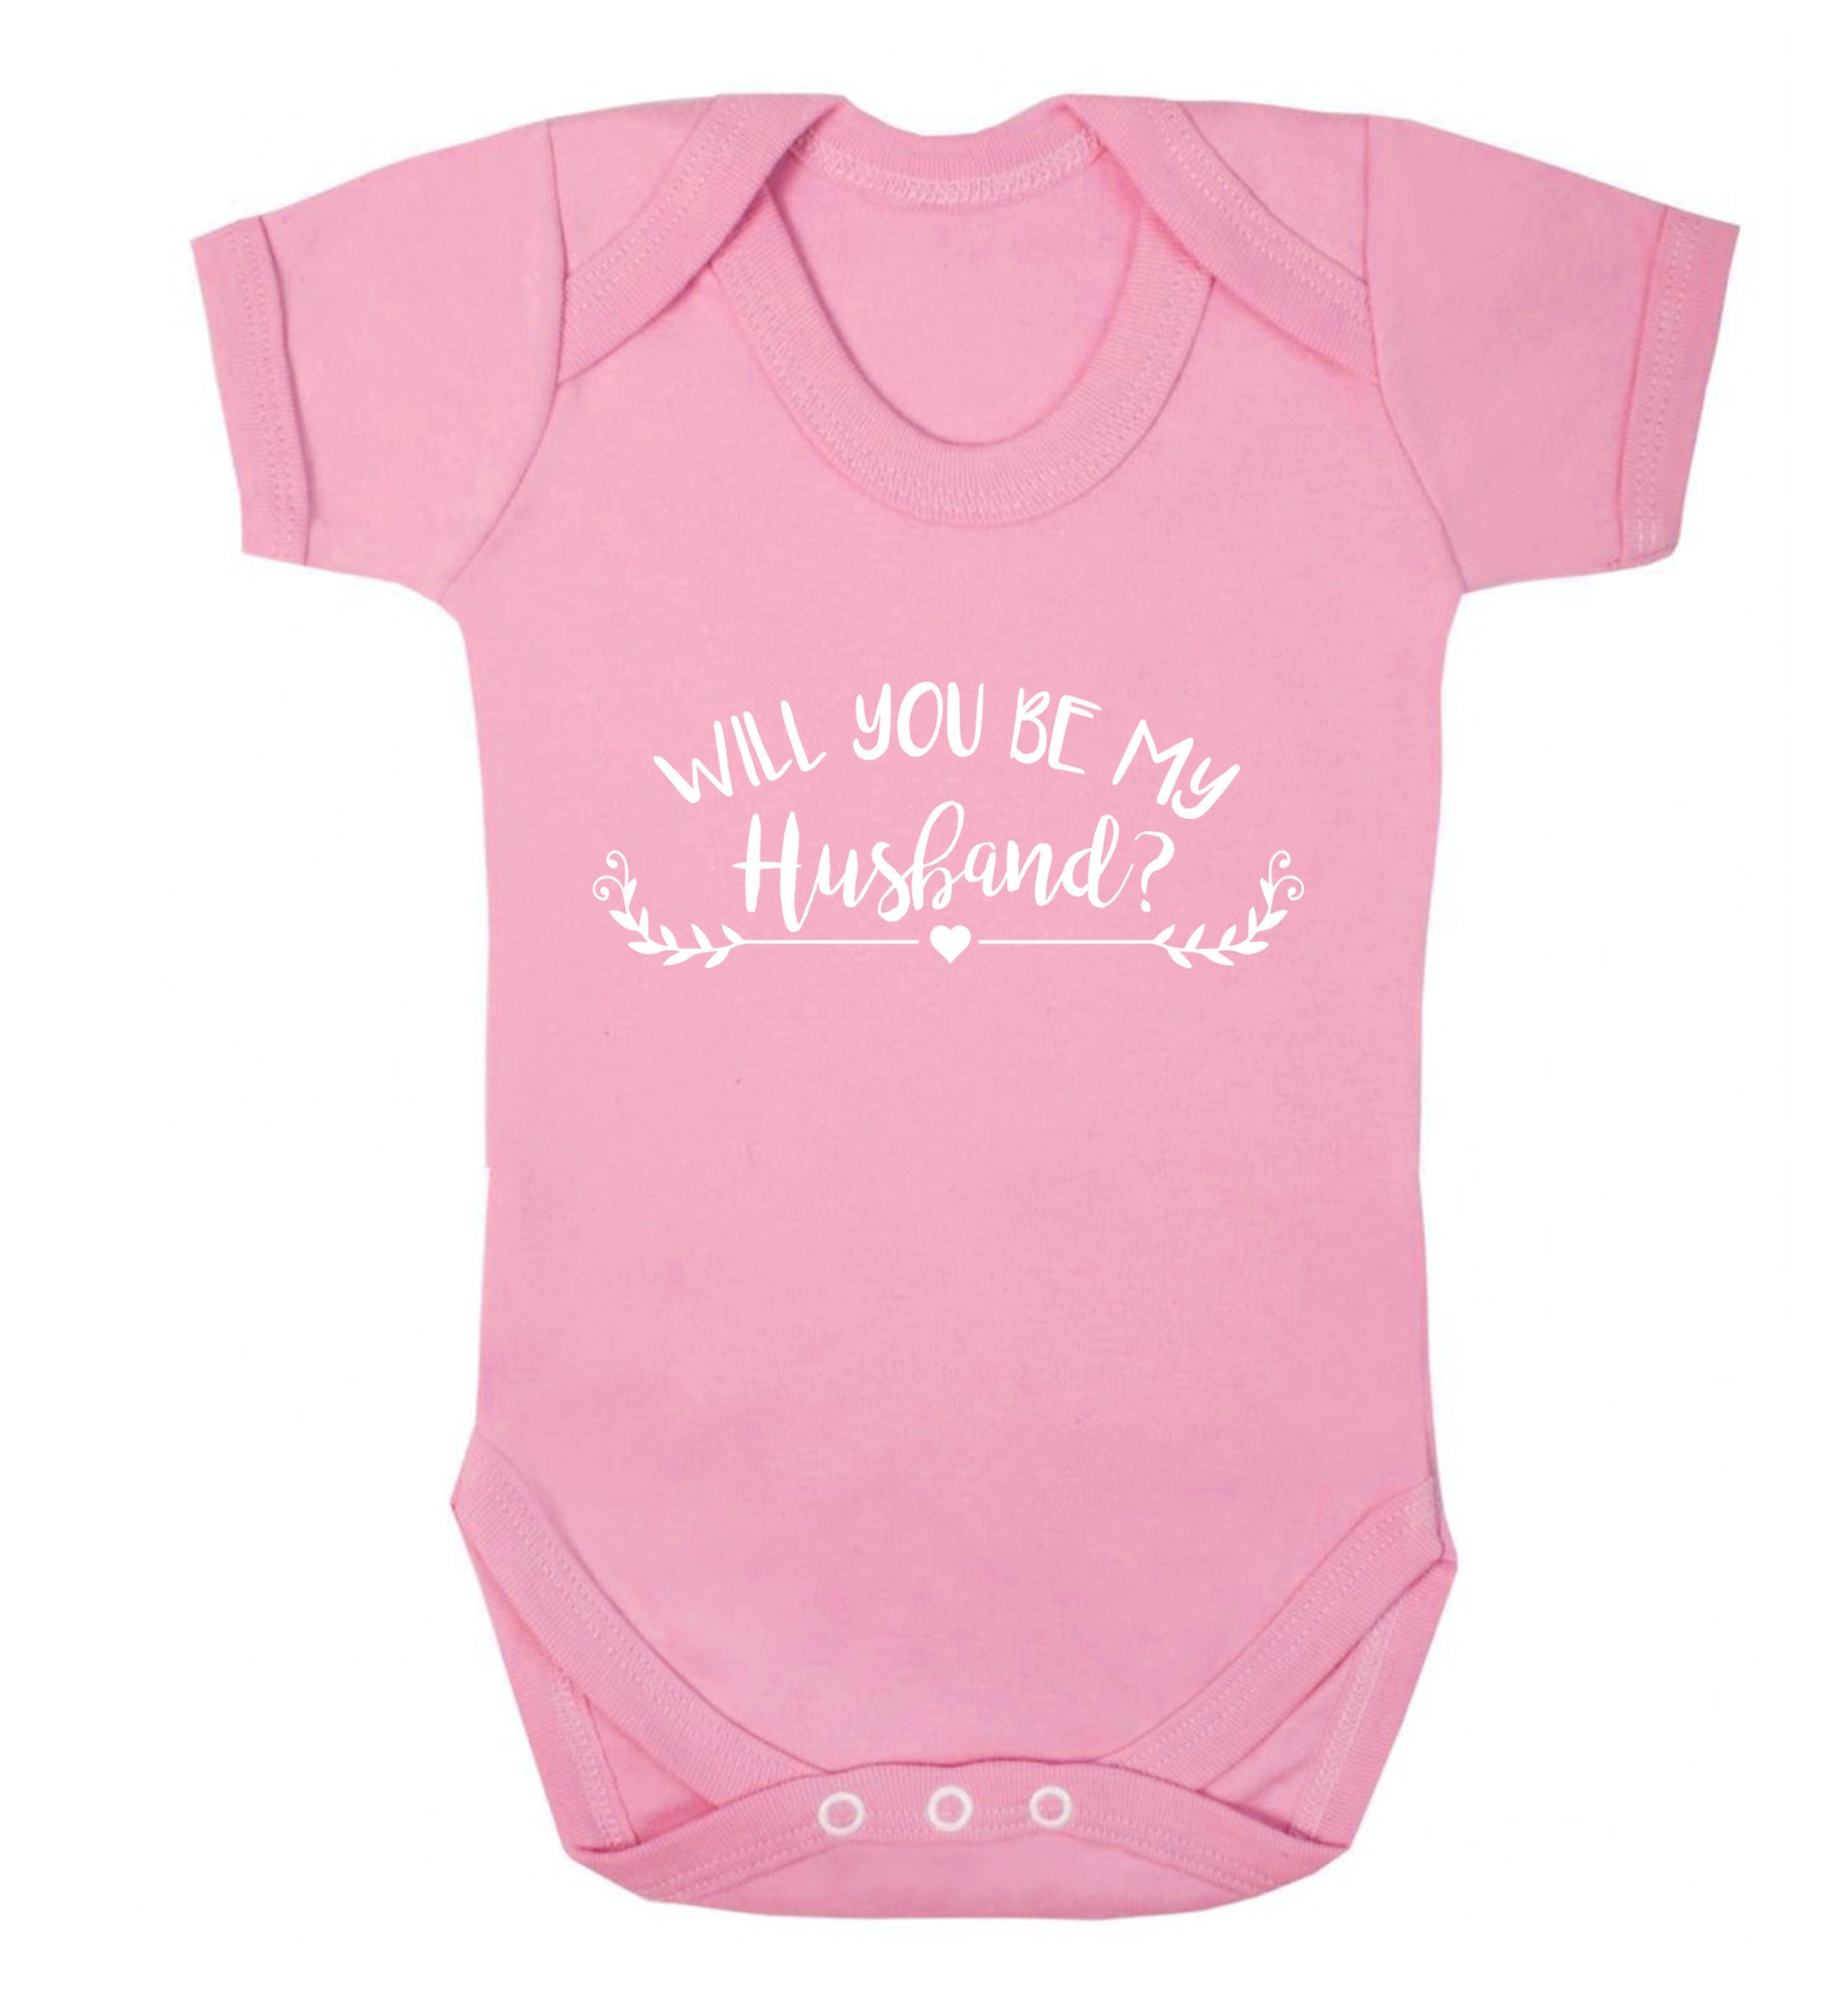 Will you be my husband? Baby Vest pale pink 18-24 months